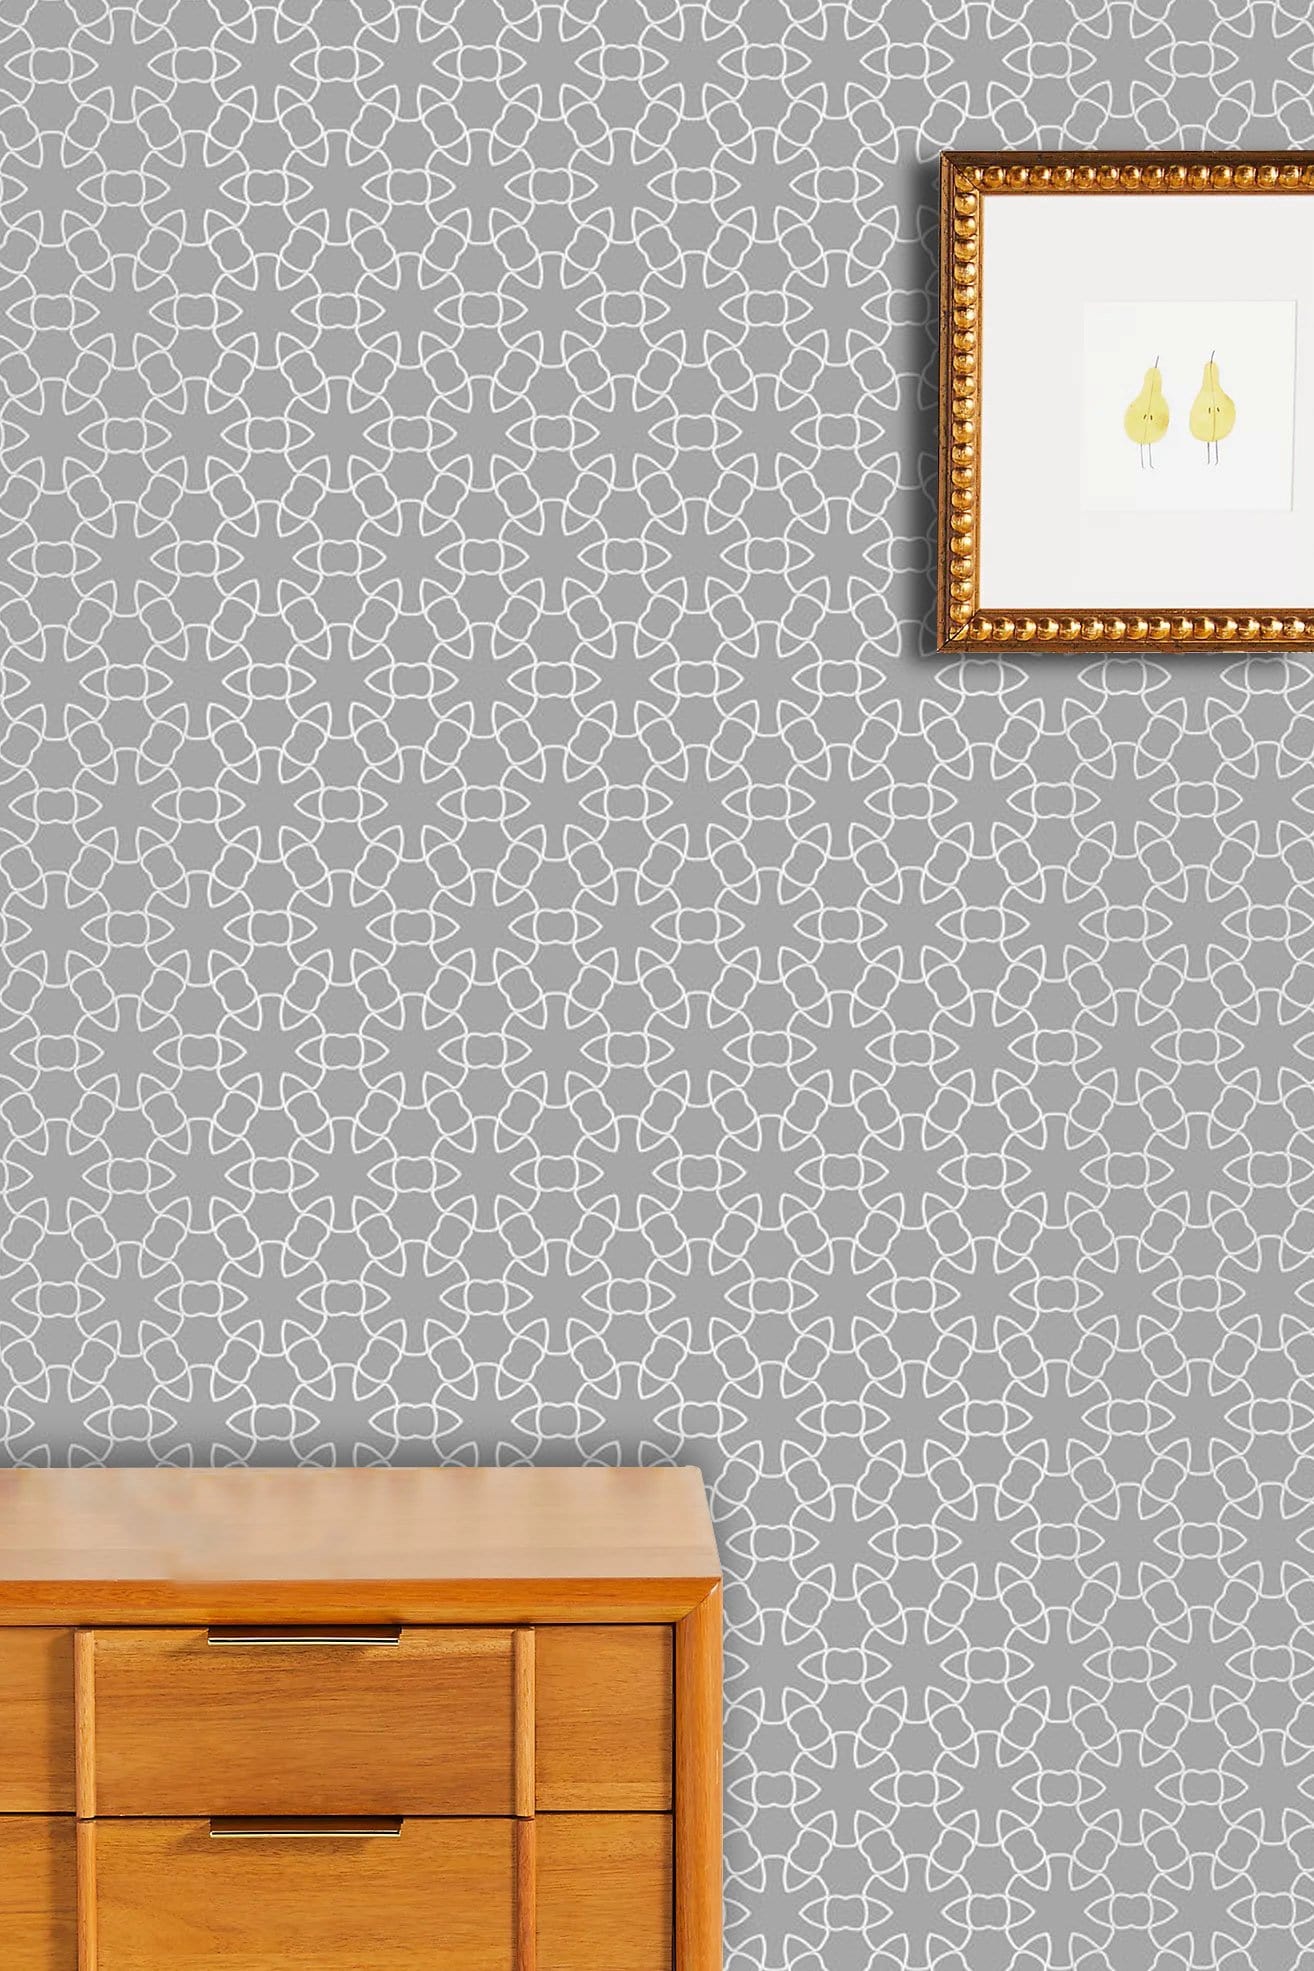 Decorate your living room with this wallpaper mural with a densely packed pattern.